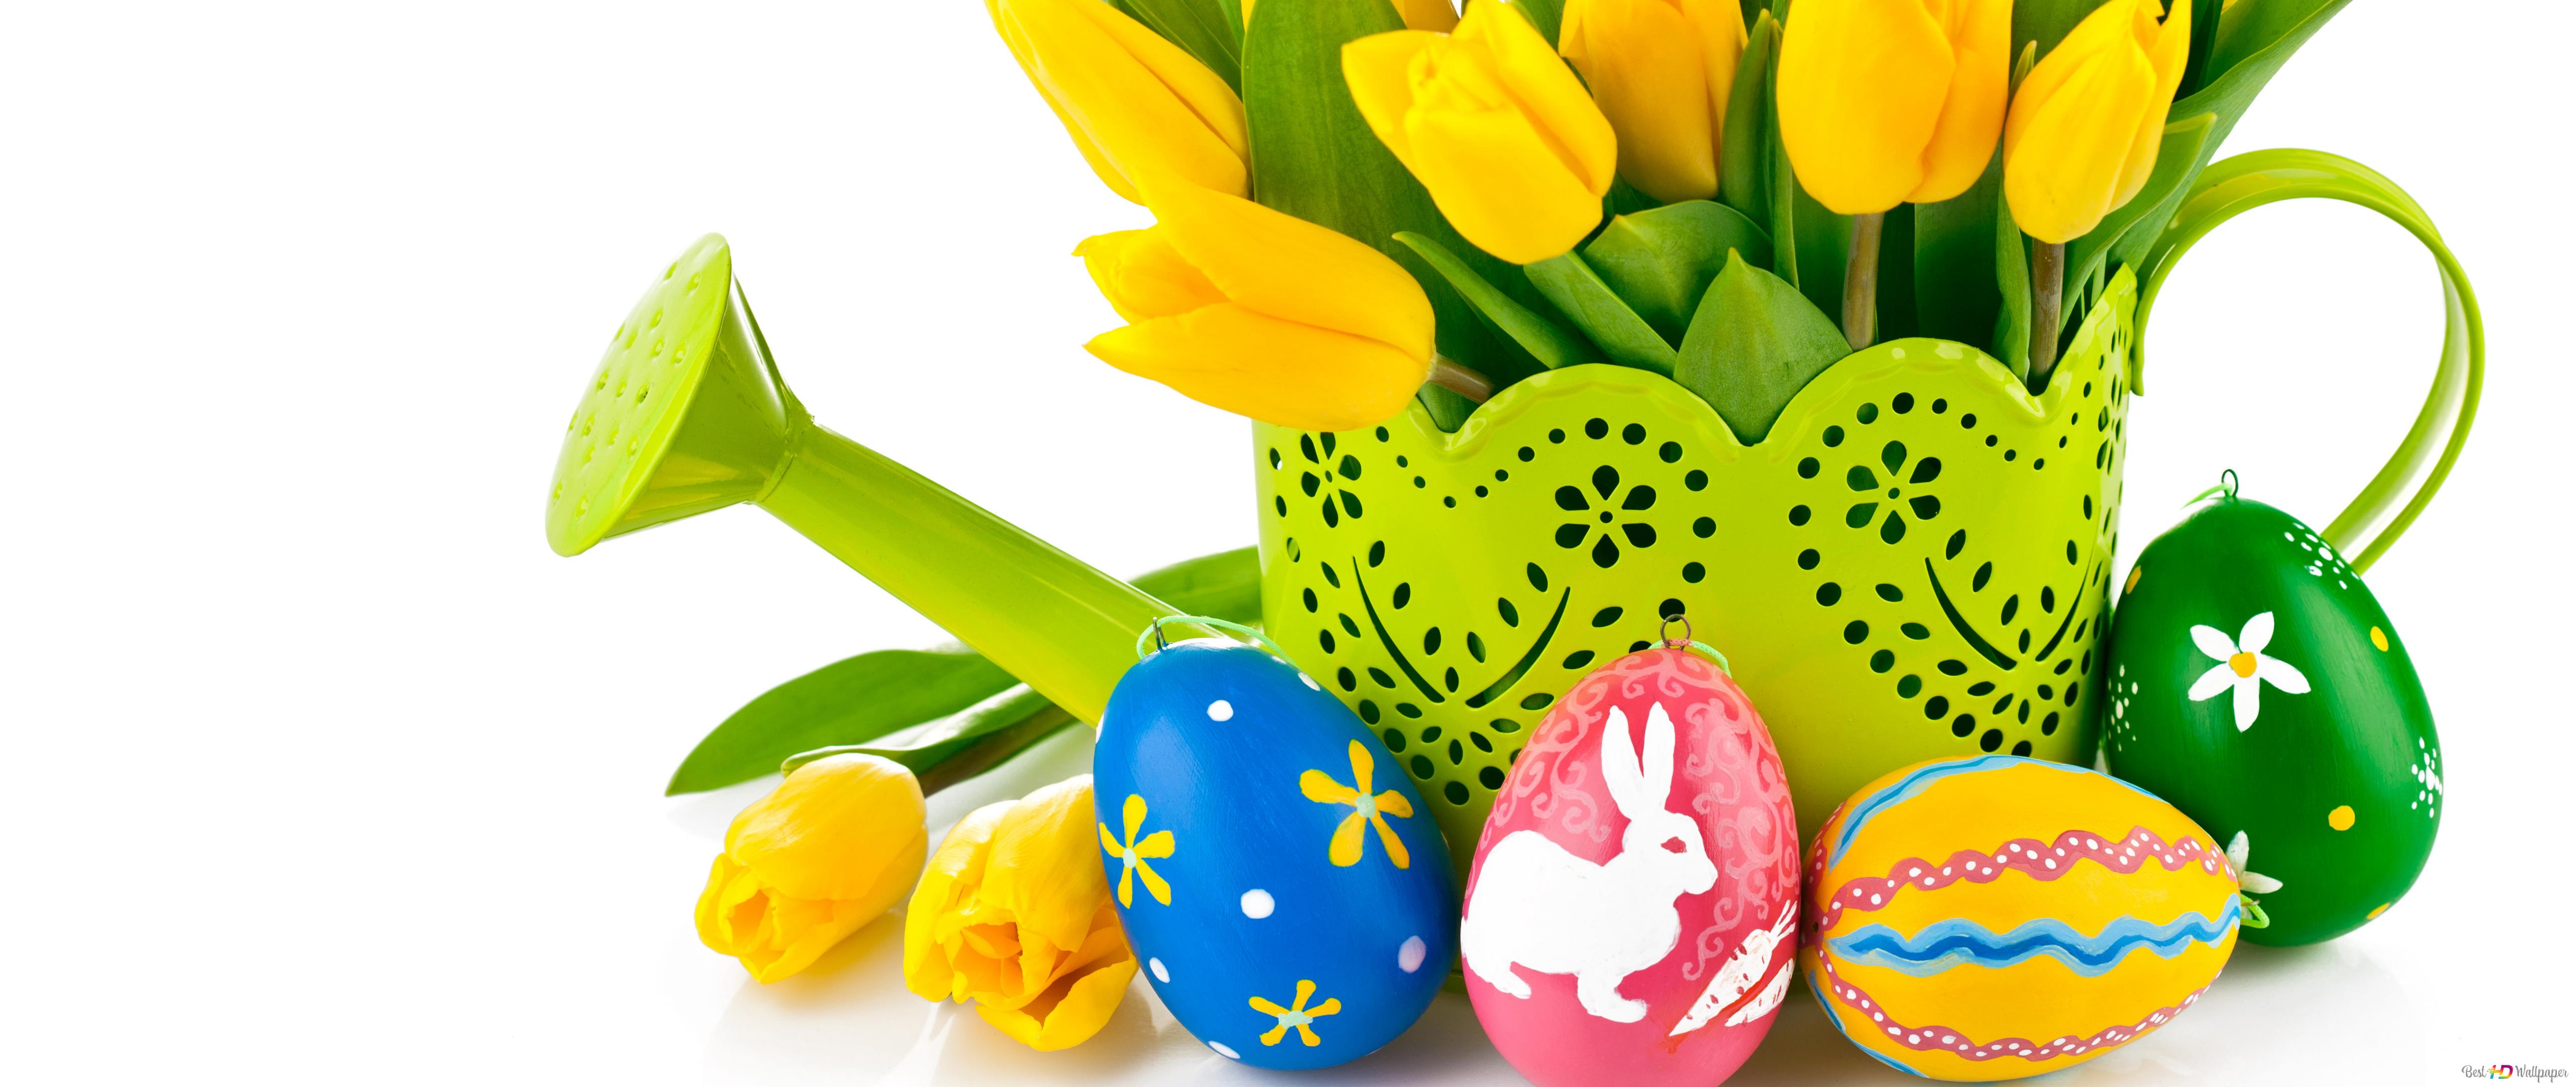 Yellow Tulips in a green water bucket and cute Easter eggs HD wallpaper download